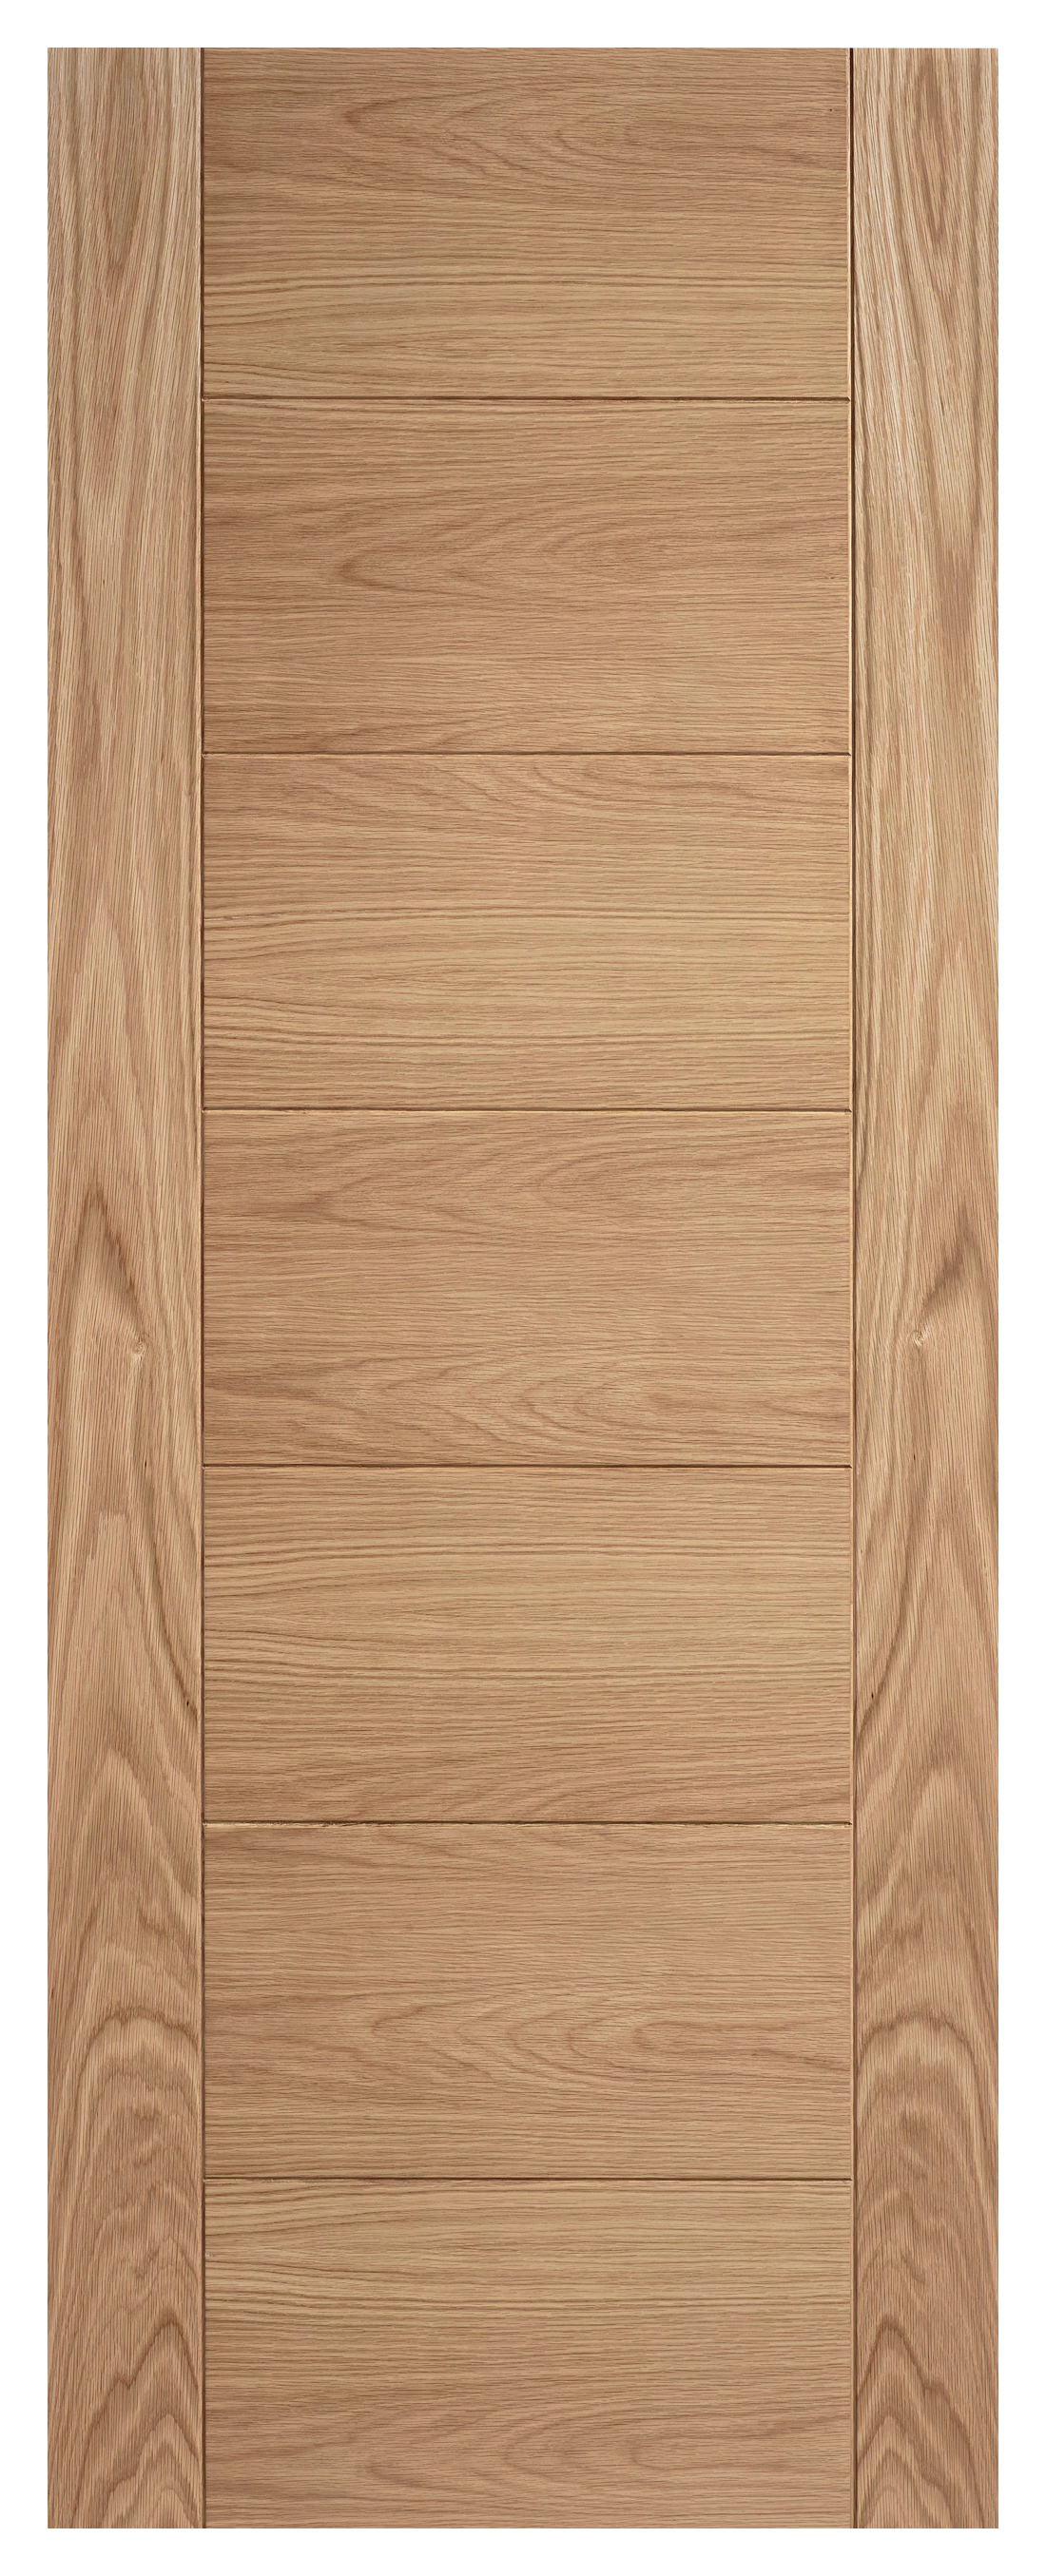 Image of LPD Internal Carini 7 Panel Pre-Finished Oak Solid Core Door - 686 x 1981mm